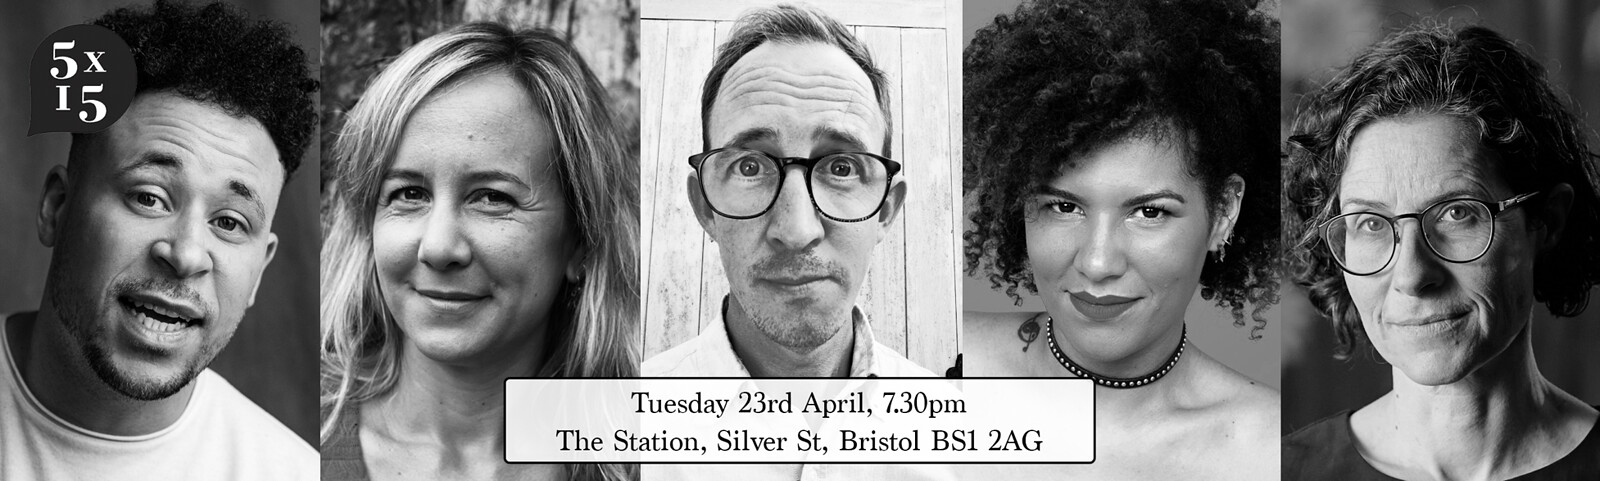 5x15 Bristol - Spring Event at The Station